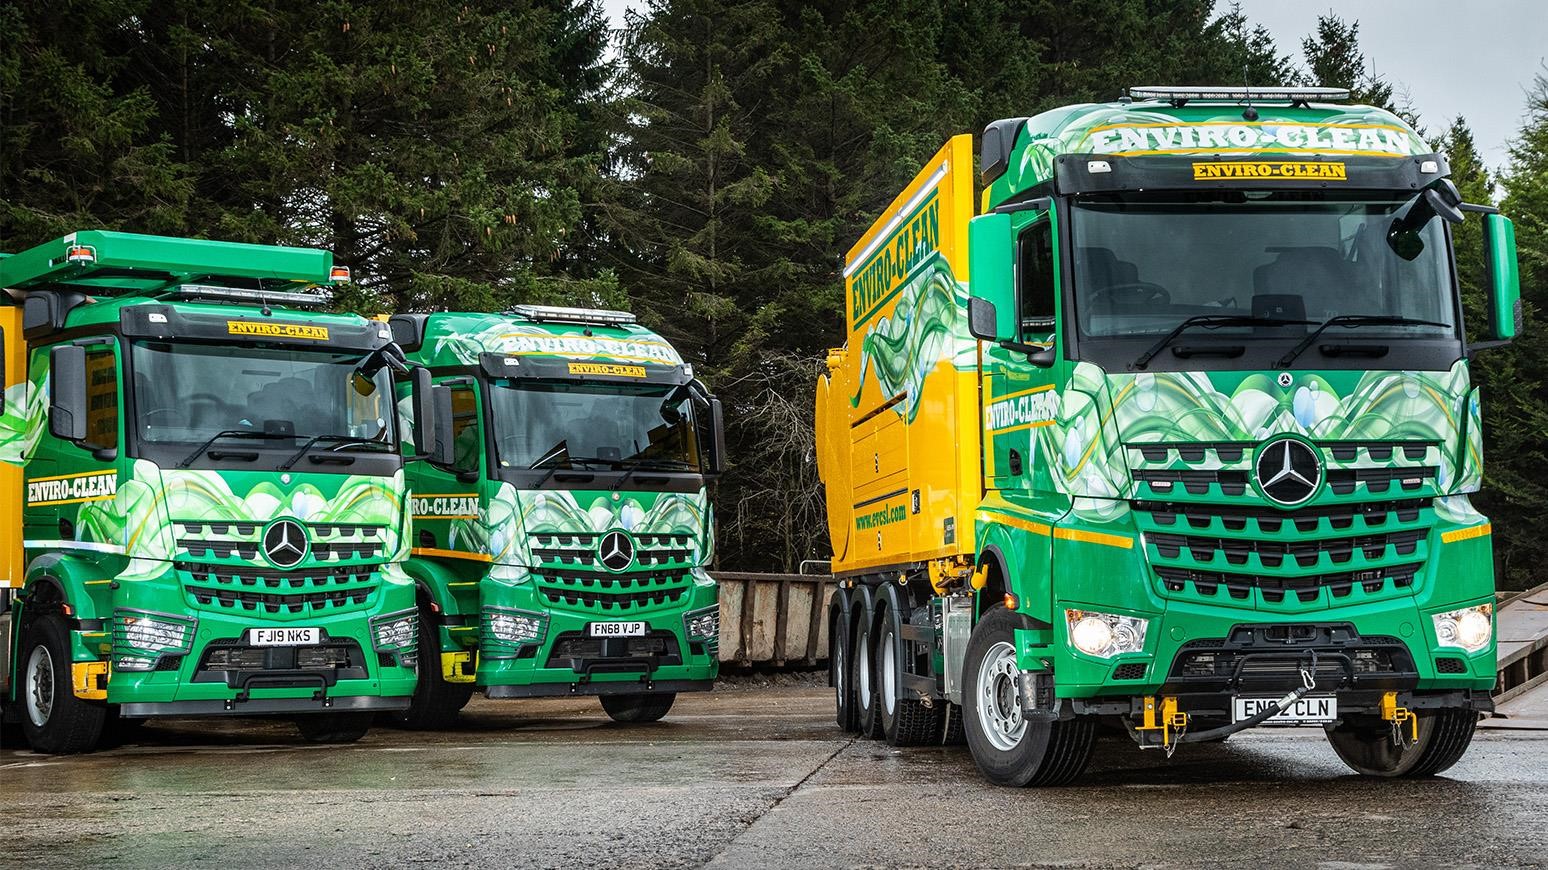 Glasgow-Based Waste Management & Cleaning Specialist Acquires New Mercedes-Benz Arocs 3258 Sewer-Cleaning Truck